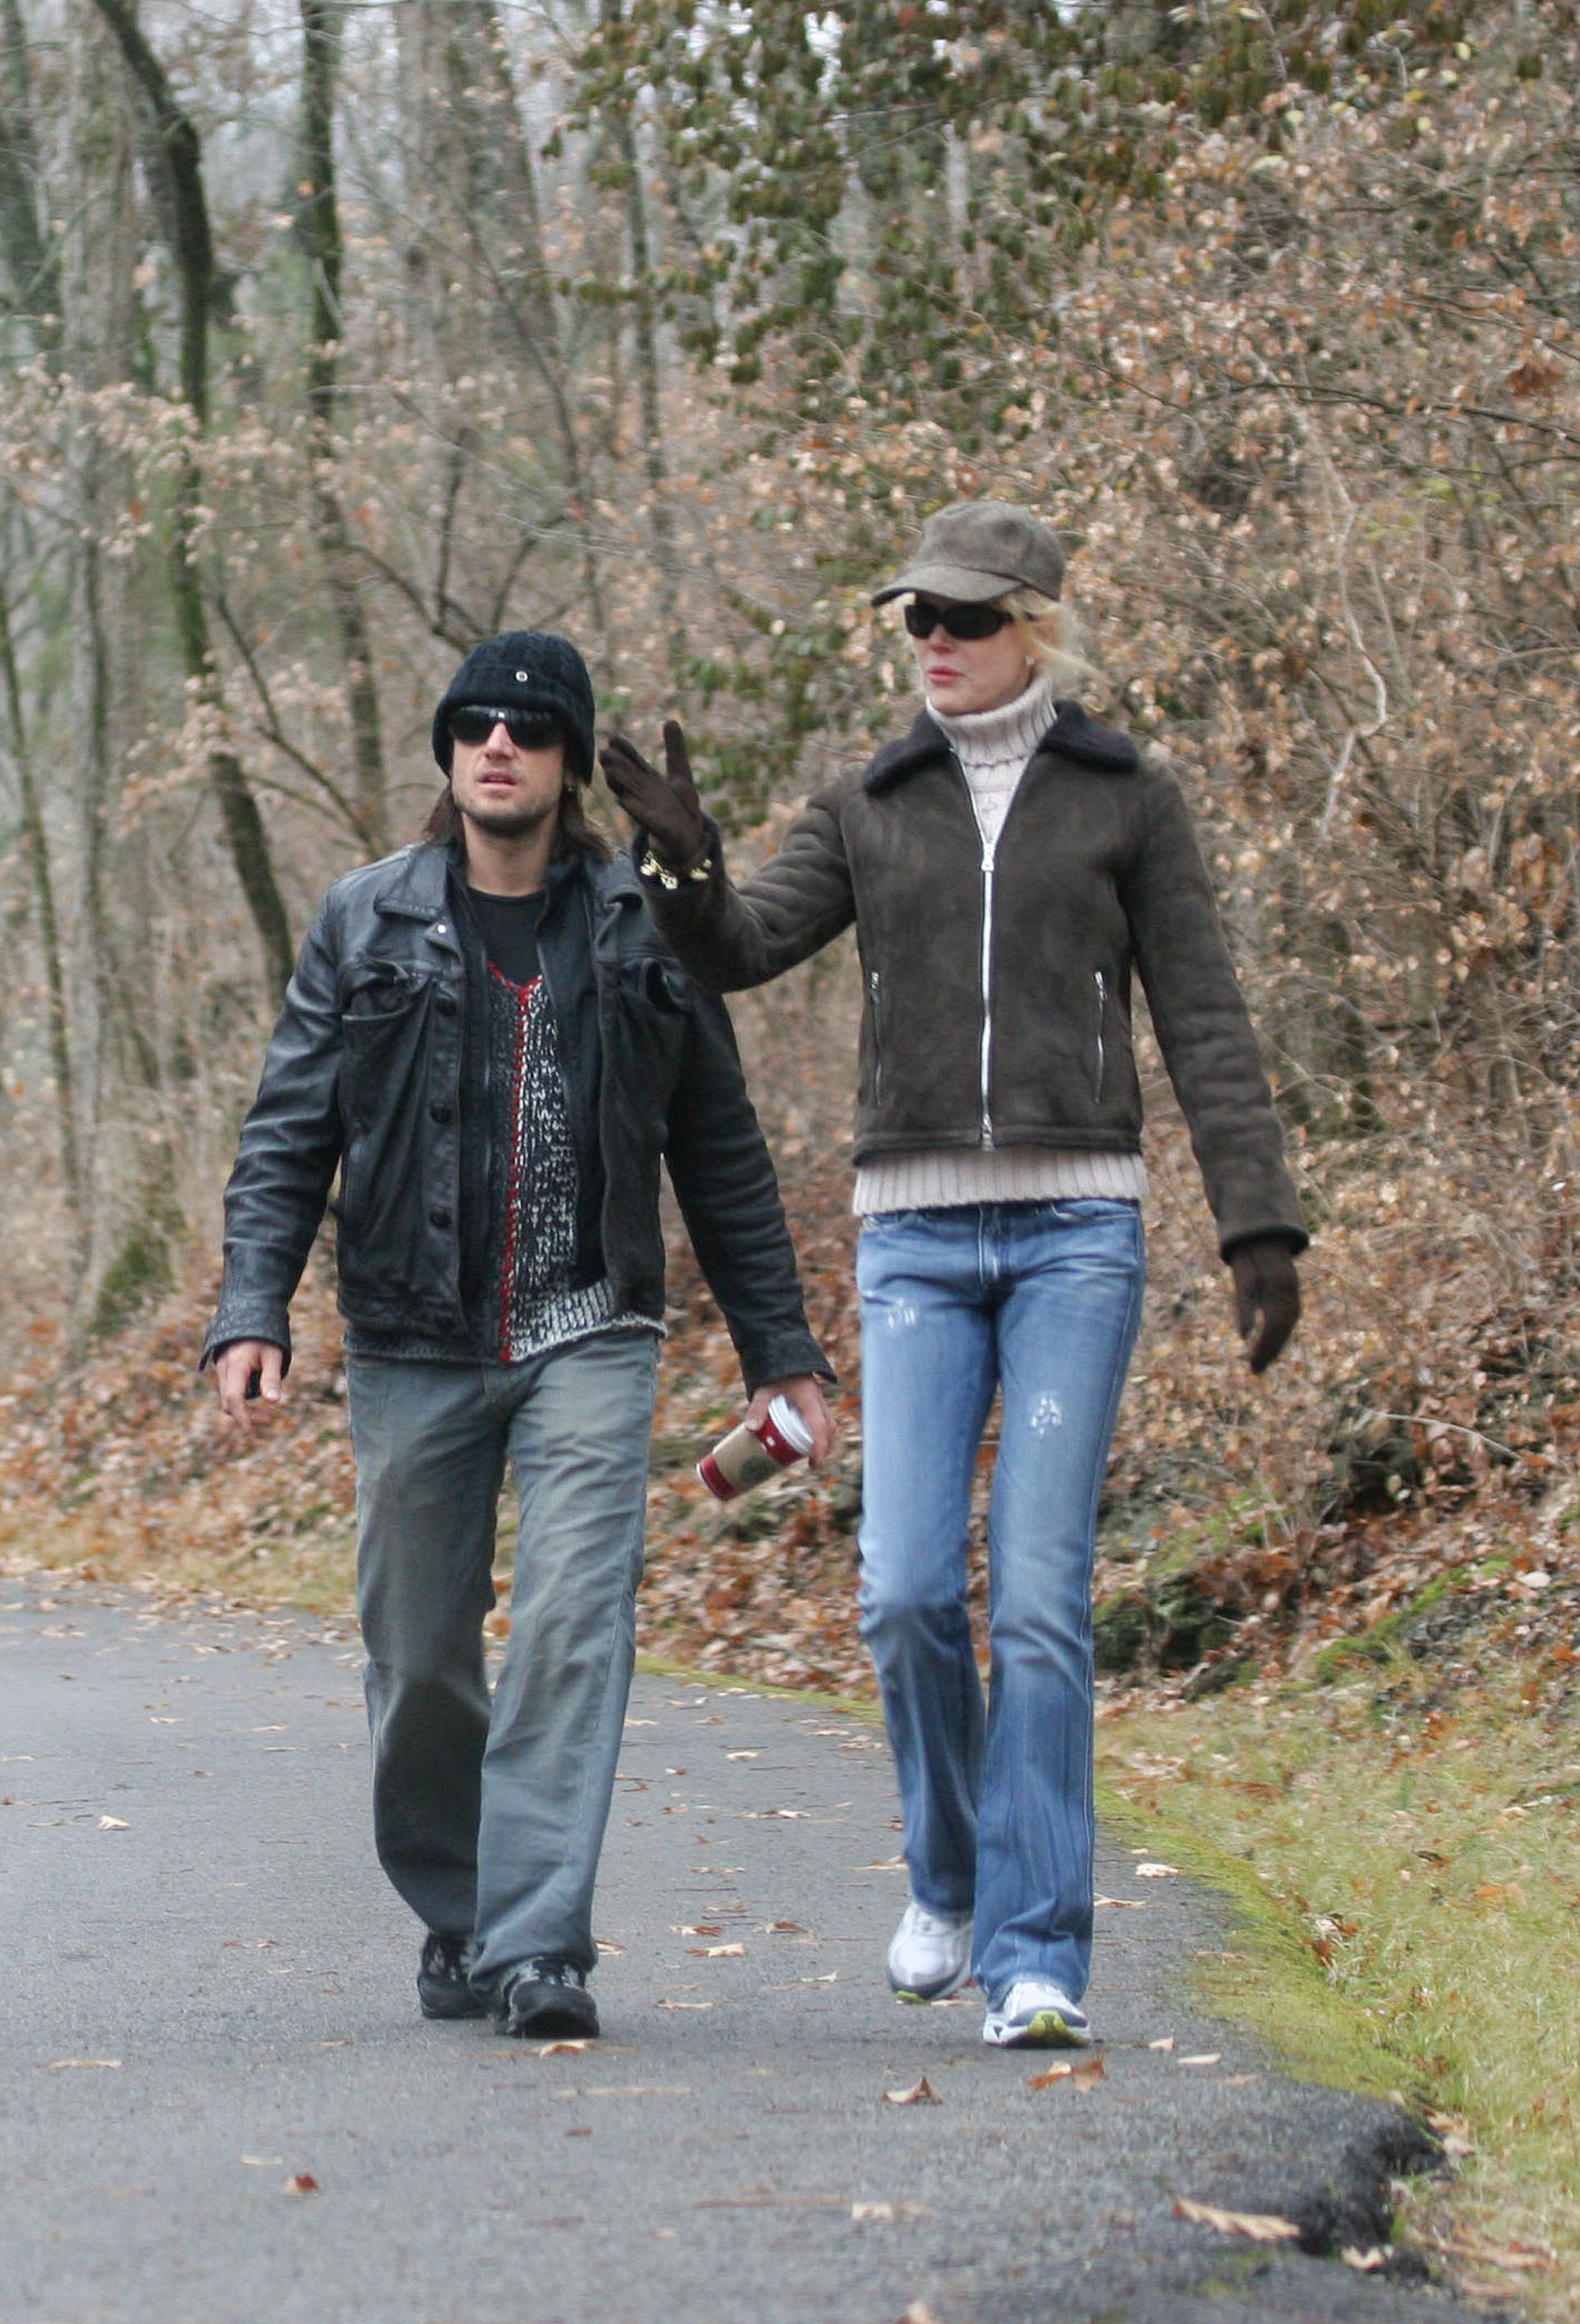 Keith Urban and Nicole Kidman are seen in Nashvillle, Tennessee, on December 25, 2005. | Source: Getty Images